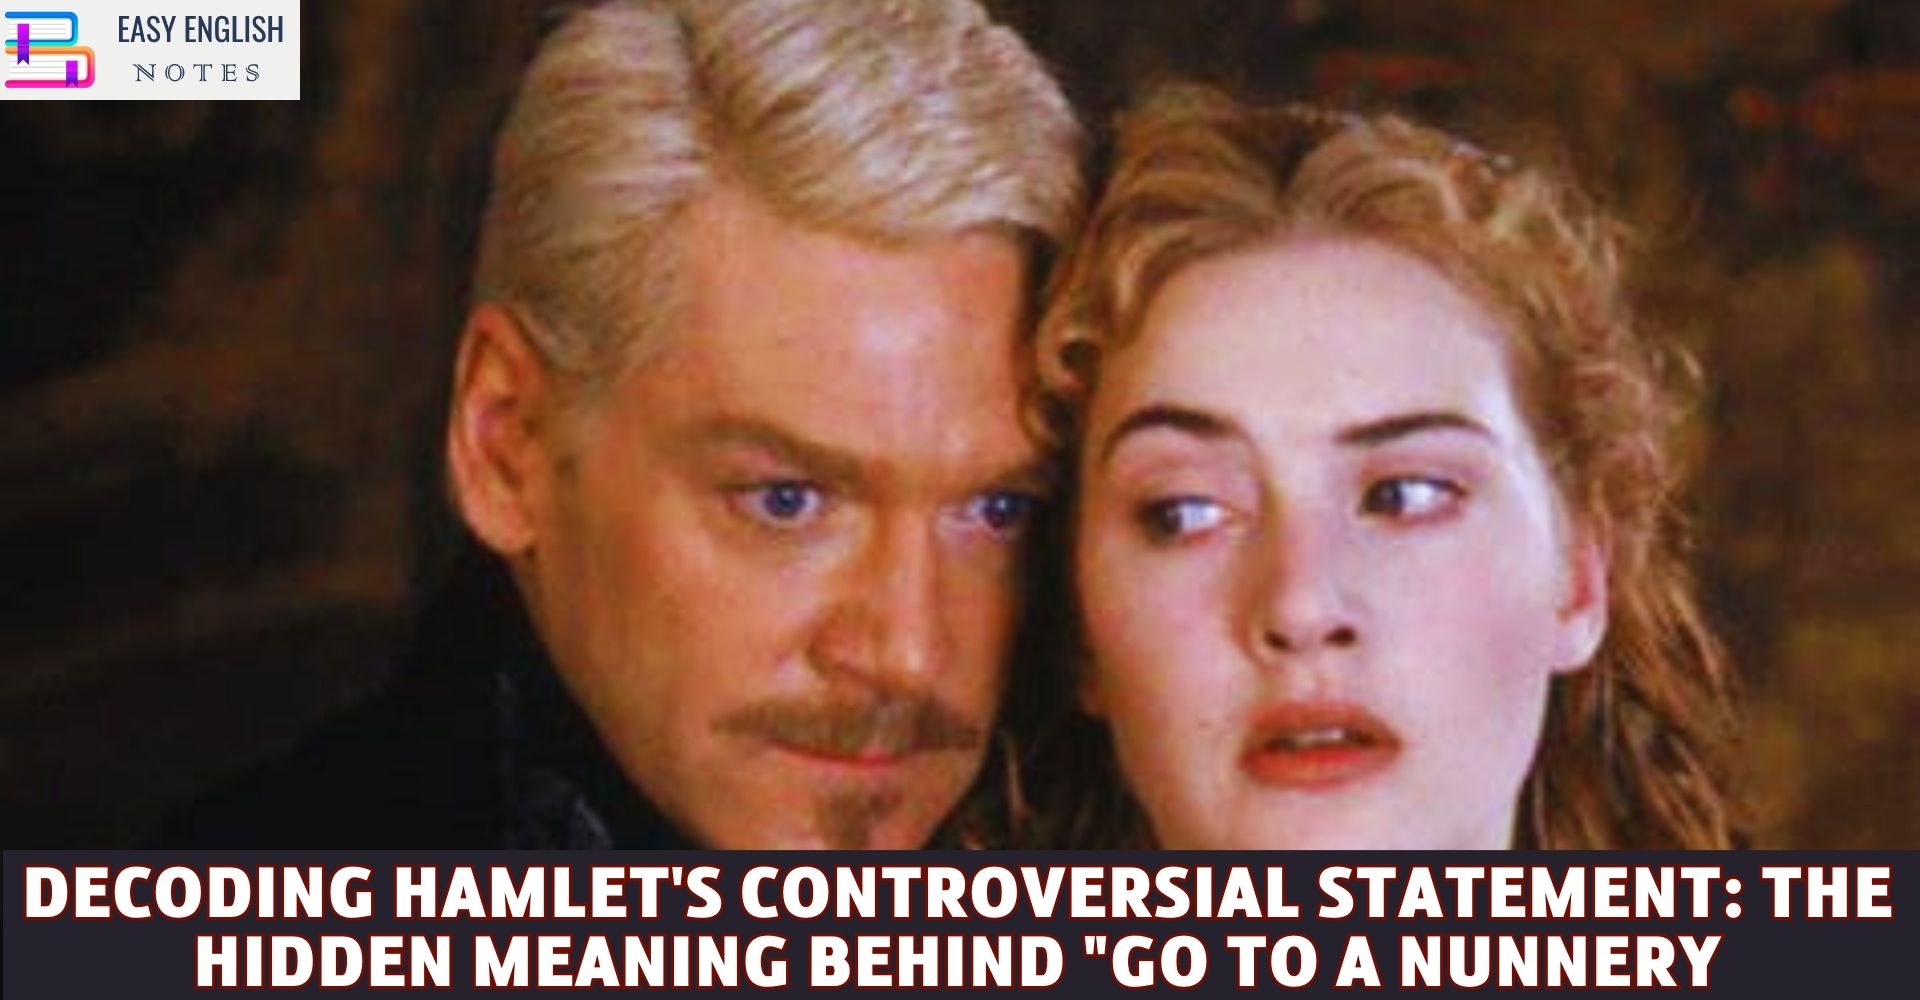 Decoding Hamlet's Controversial Statement: The Hidden Meaning Behind "Go to a Nunnery